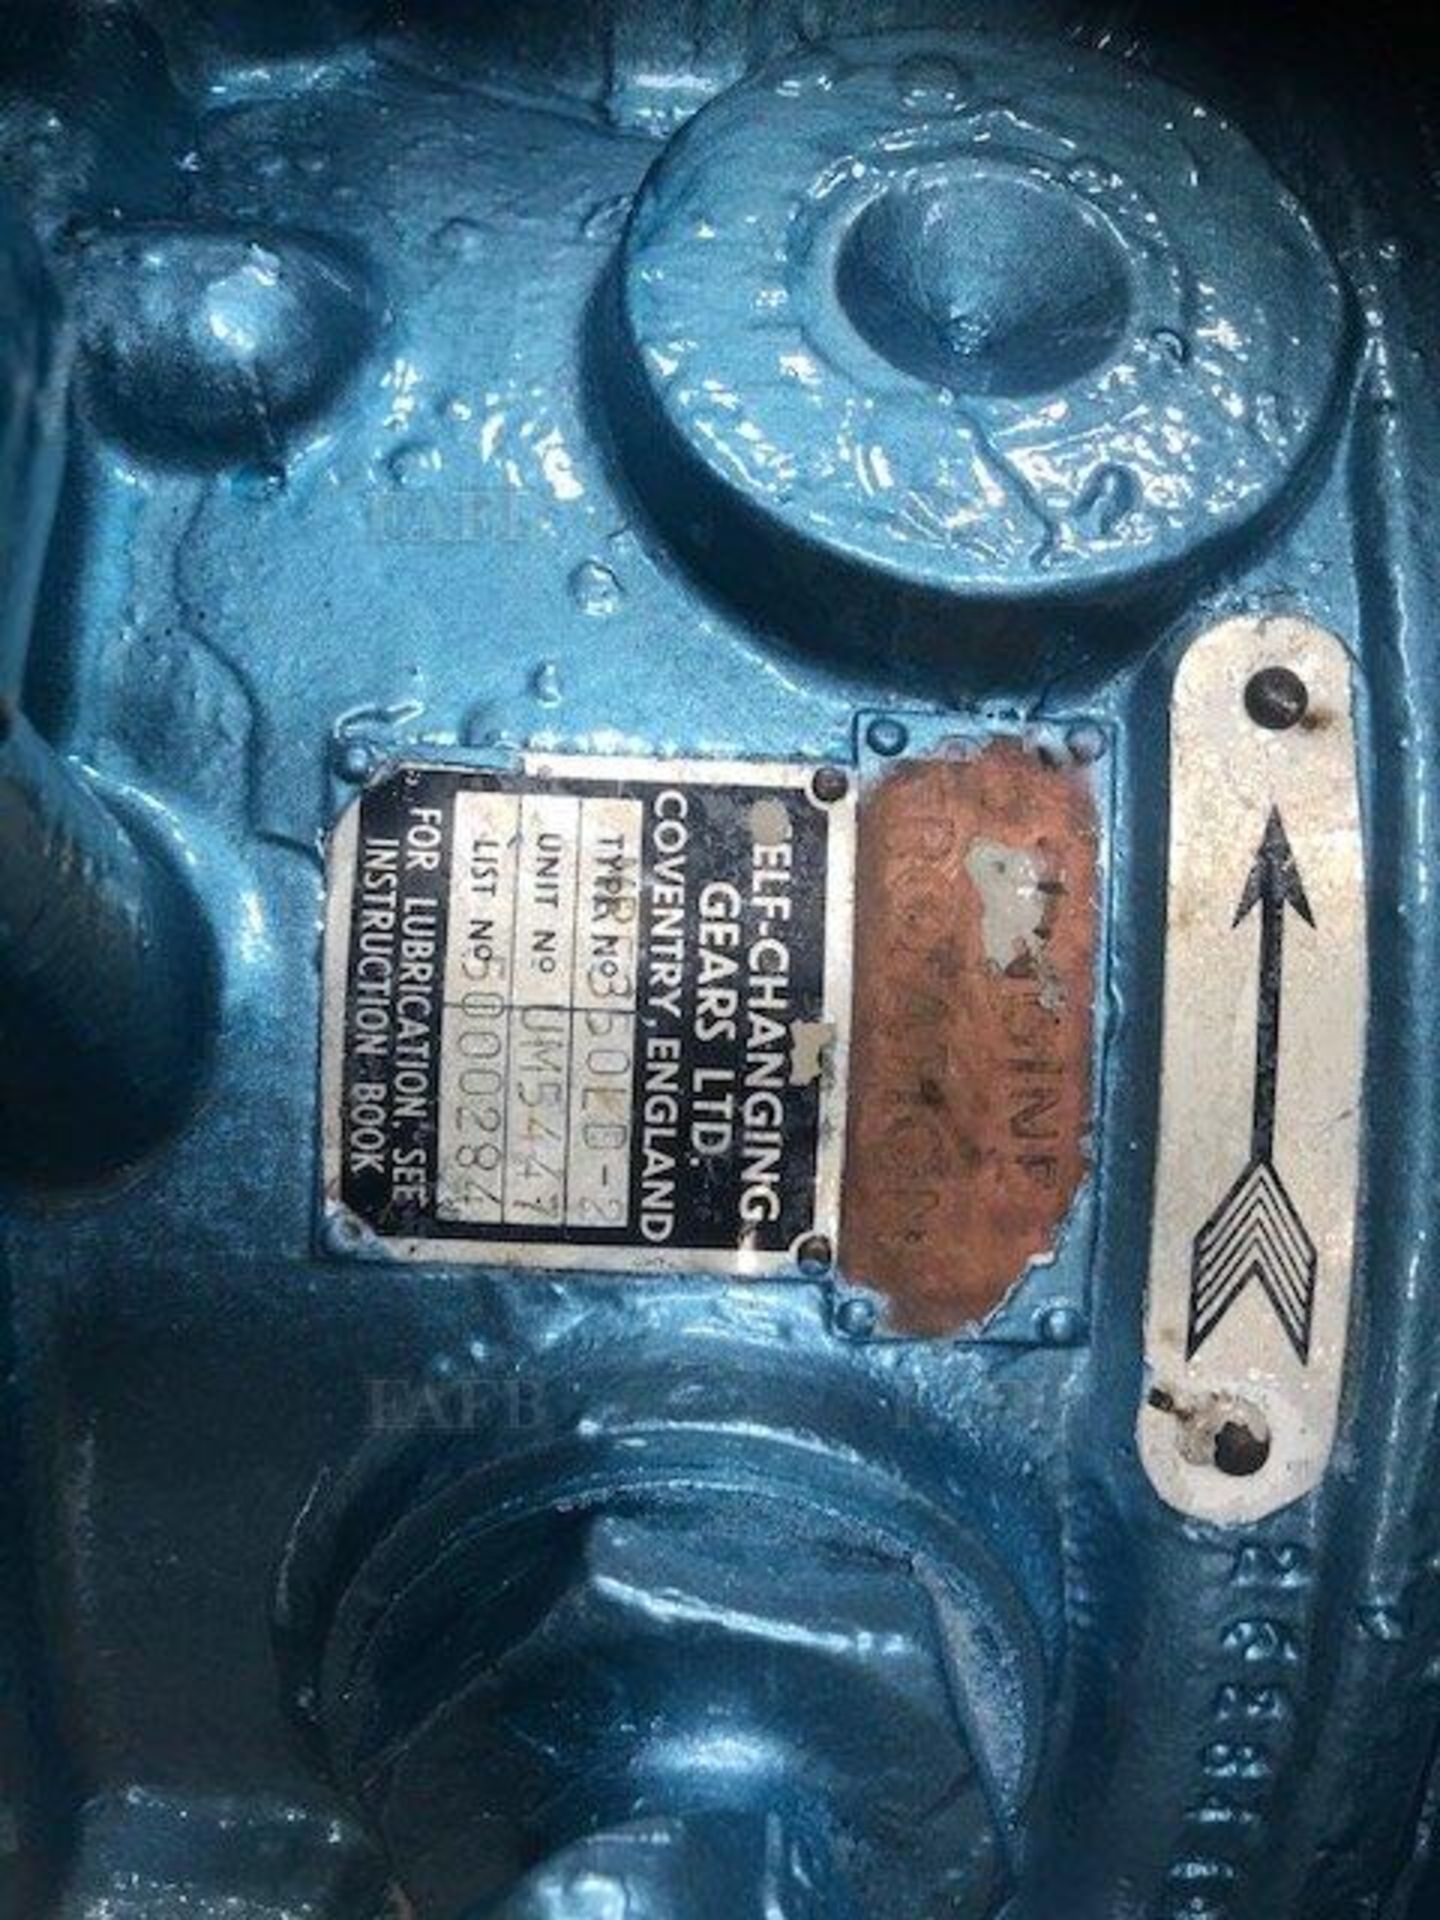 Reconditioned Self Change MR350LD-2 Marine Gearbox ratio 1:1 - Image 4 of 4